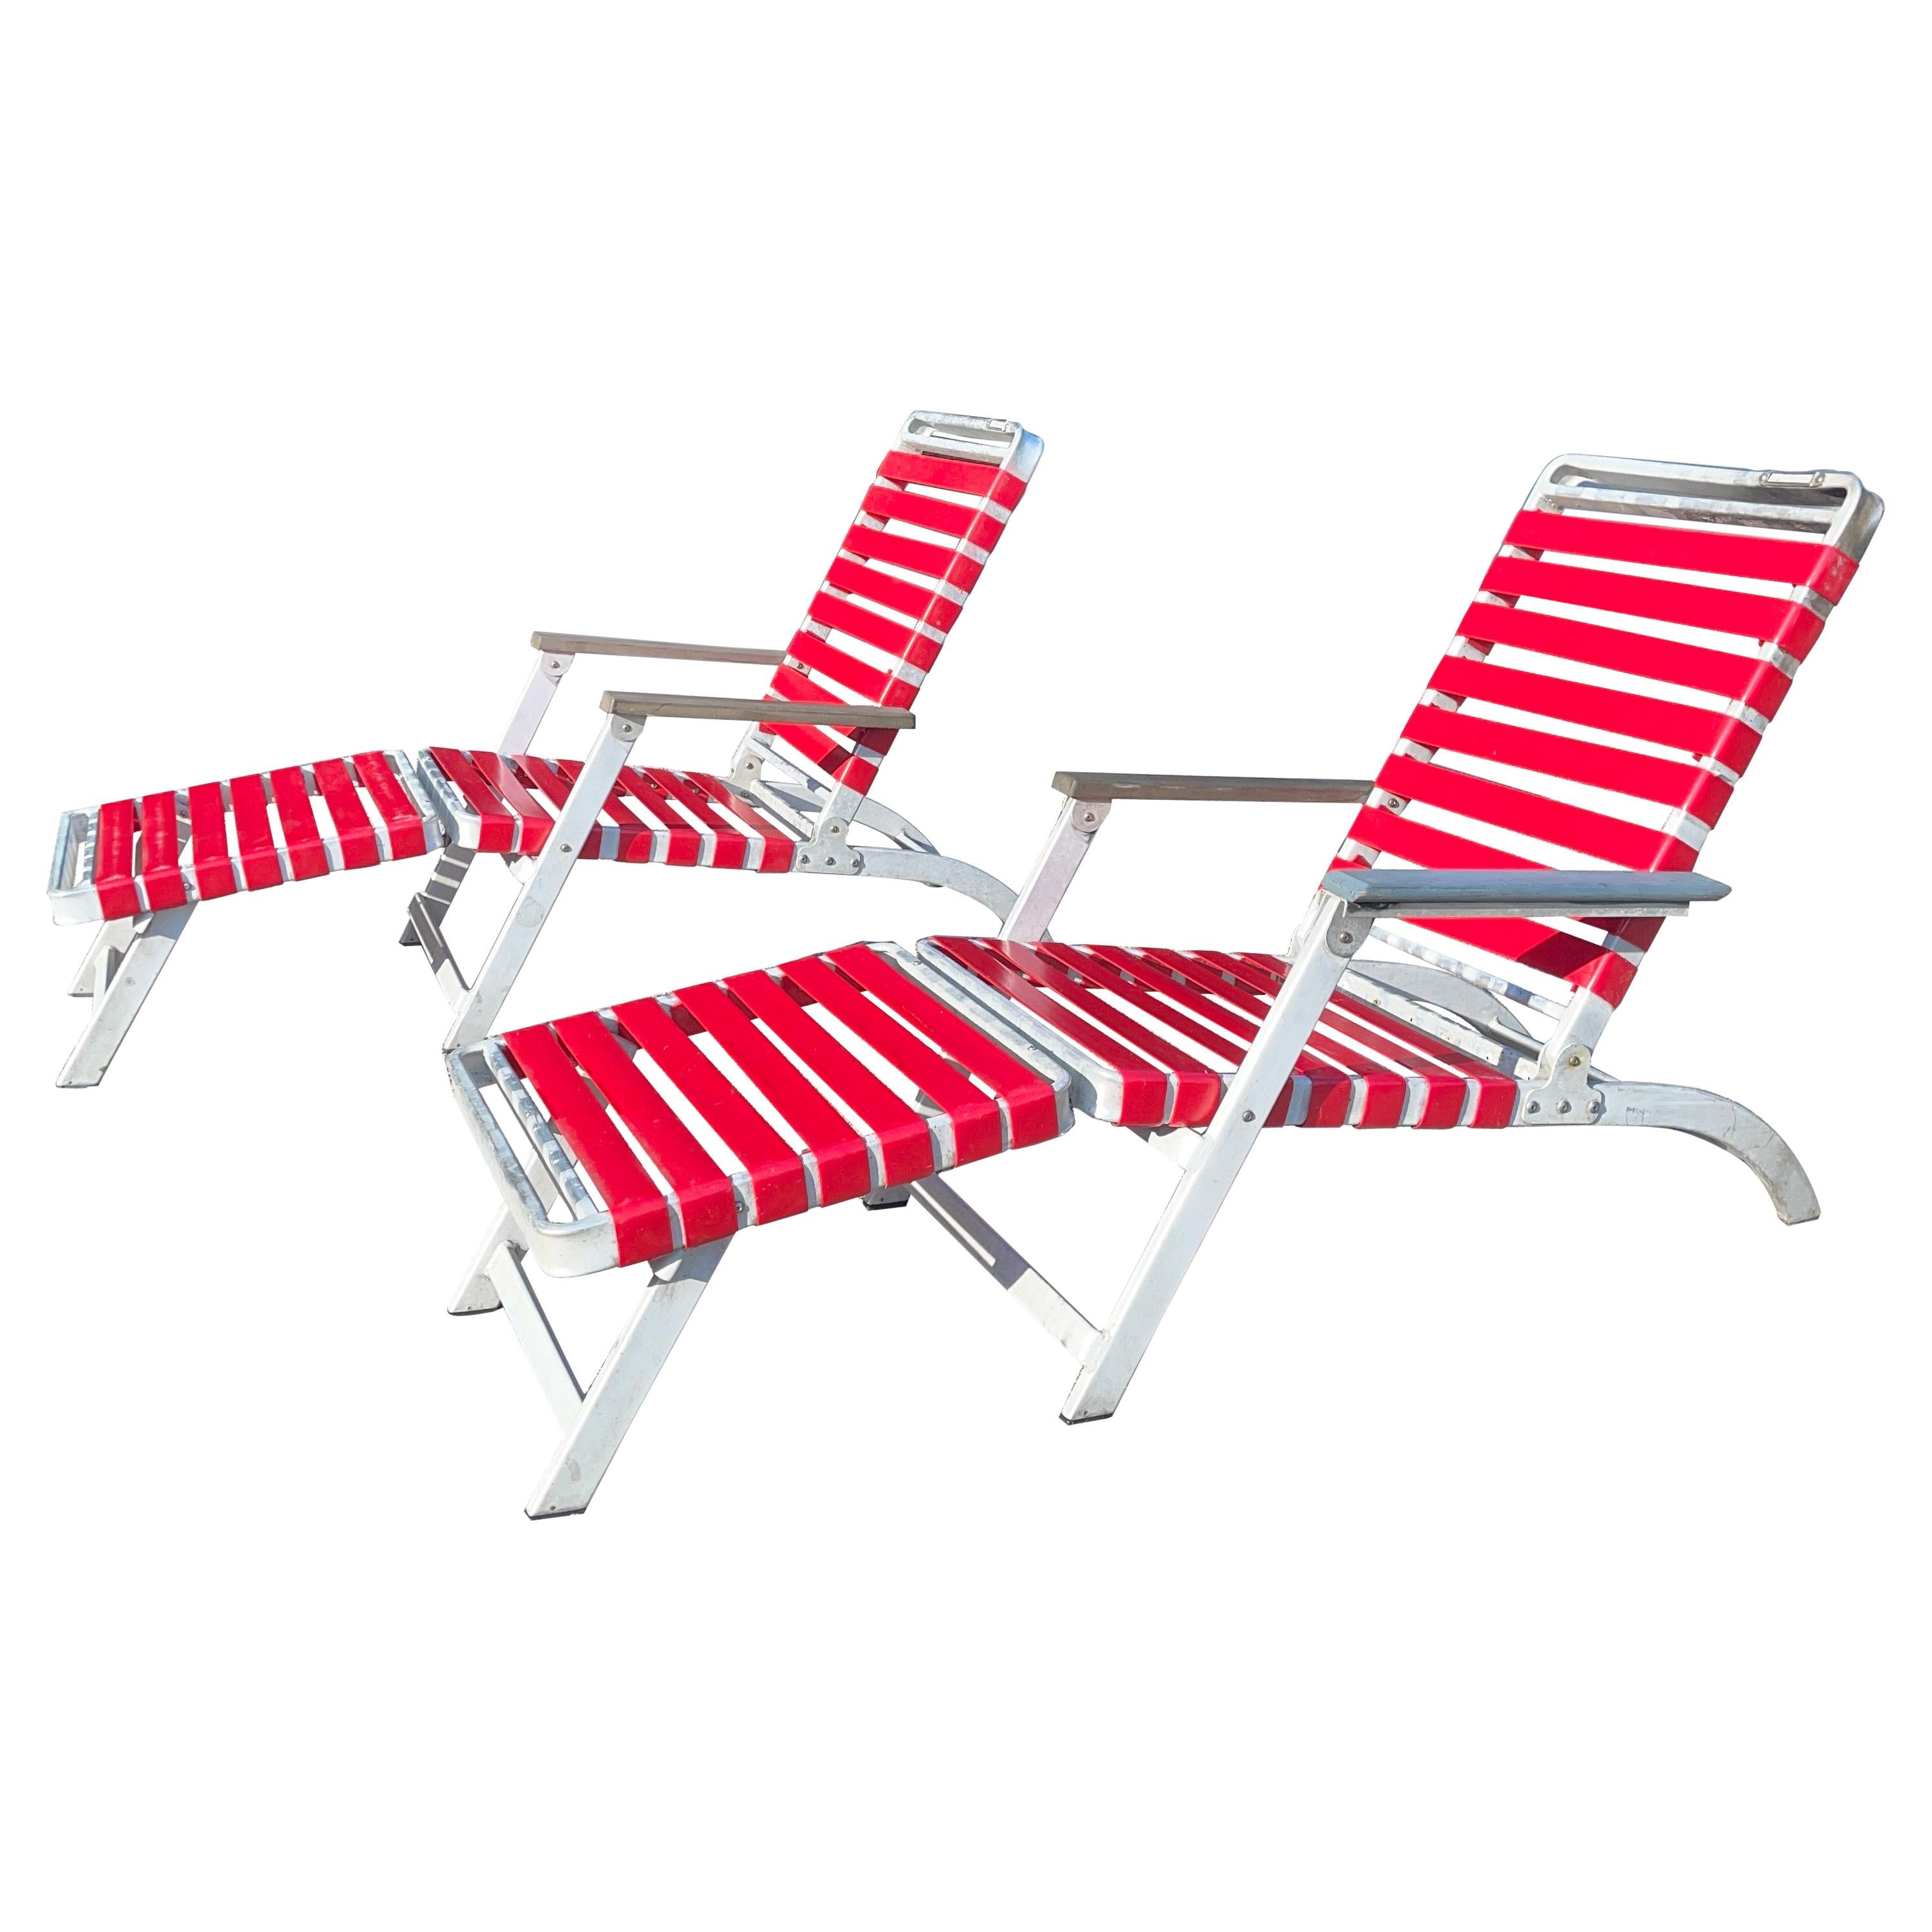 SS United States Pair of Folding Deck Chairs by Troy Sunshade Co.